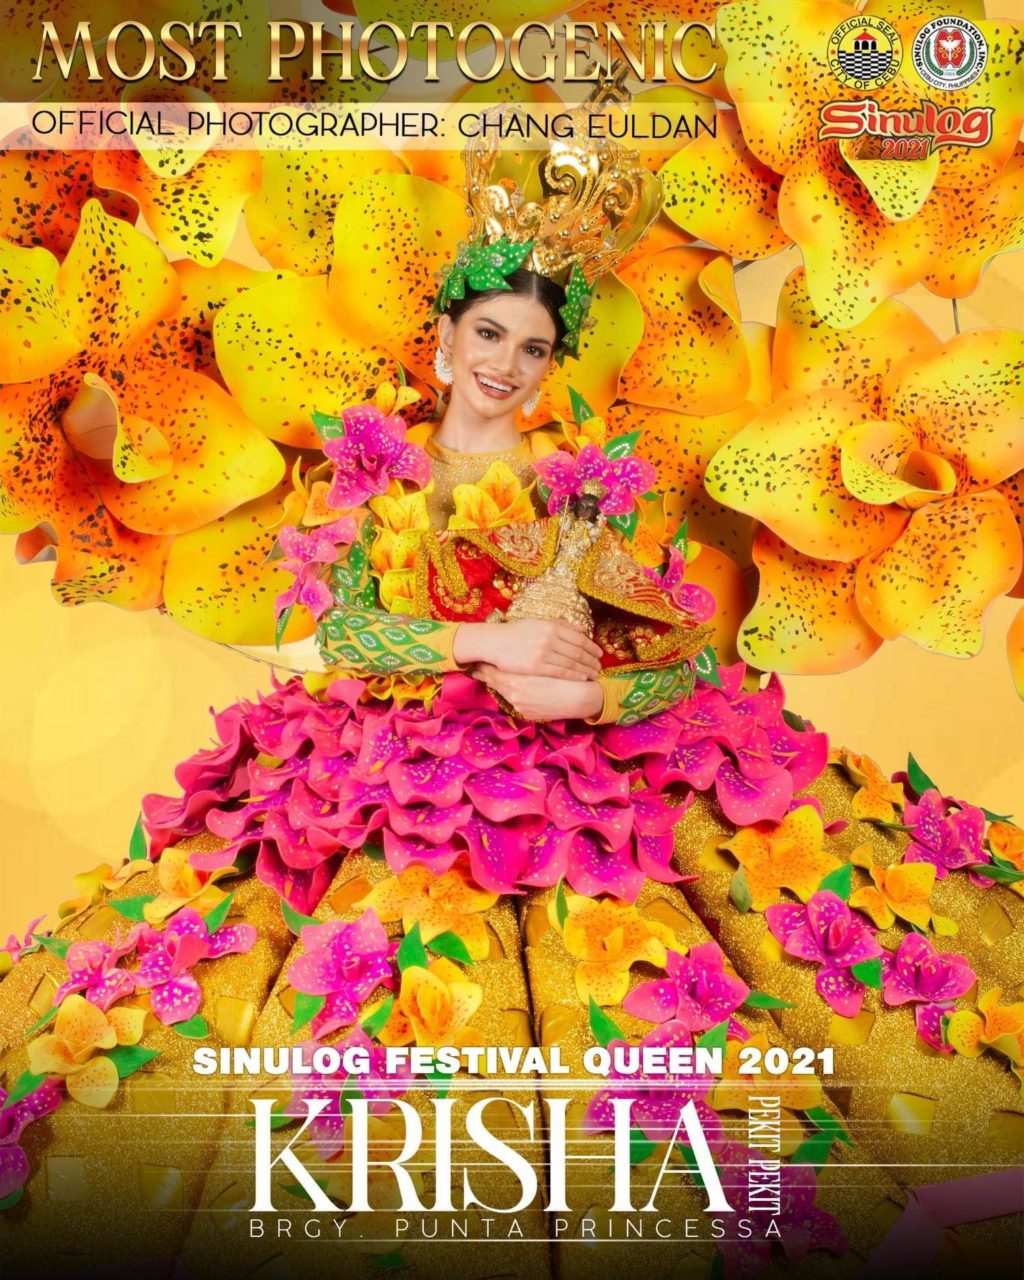 #CDNFiestaSeñor2022: From a dancing devotee to the official photographer of the Sinulog Festival